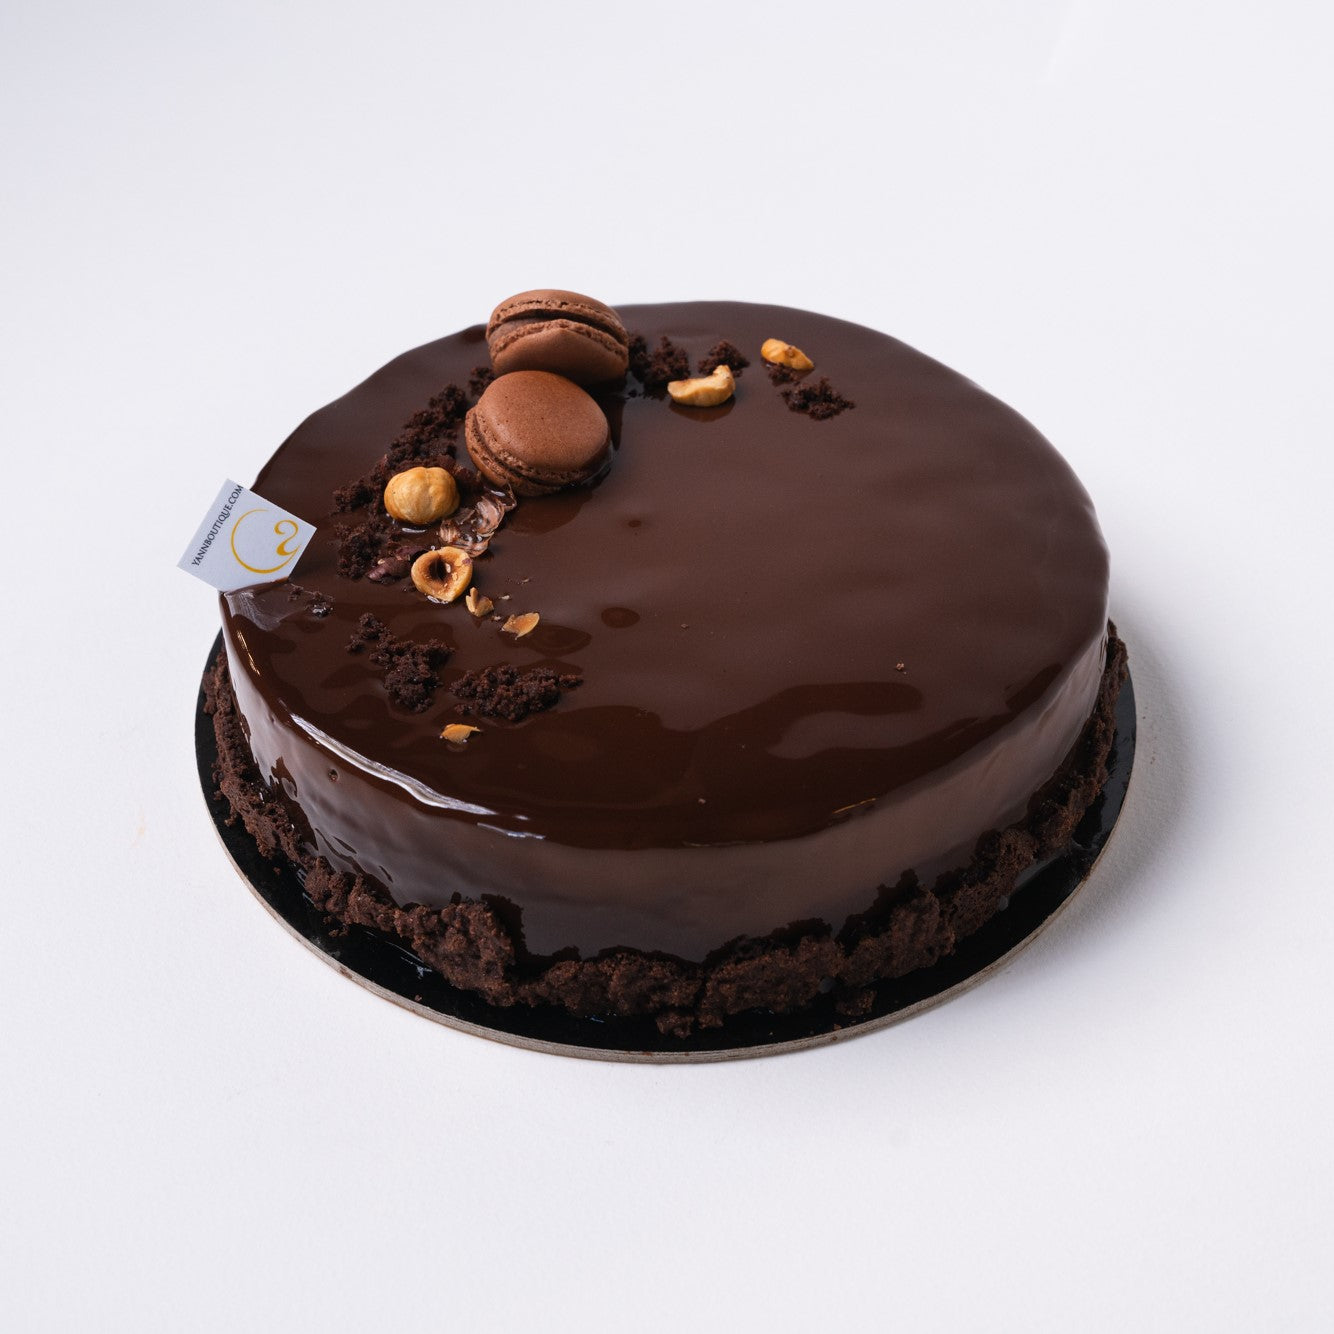 Chocolate cake - Yann Haute Patisserie, authentic French bakery for the best desserts, cakes, croissants and macarons in this happy yellow house pastry shop.